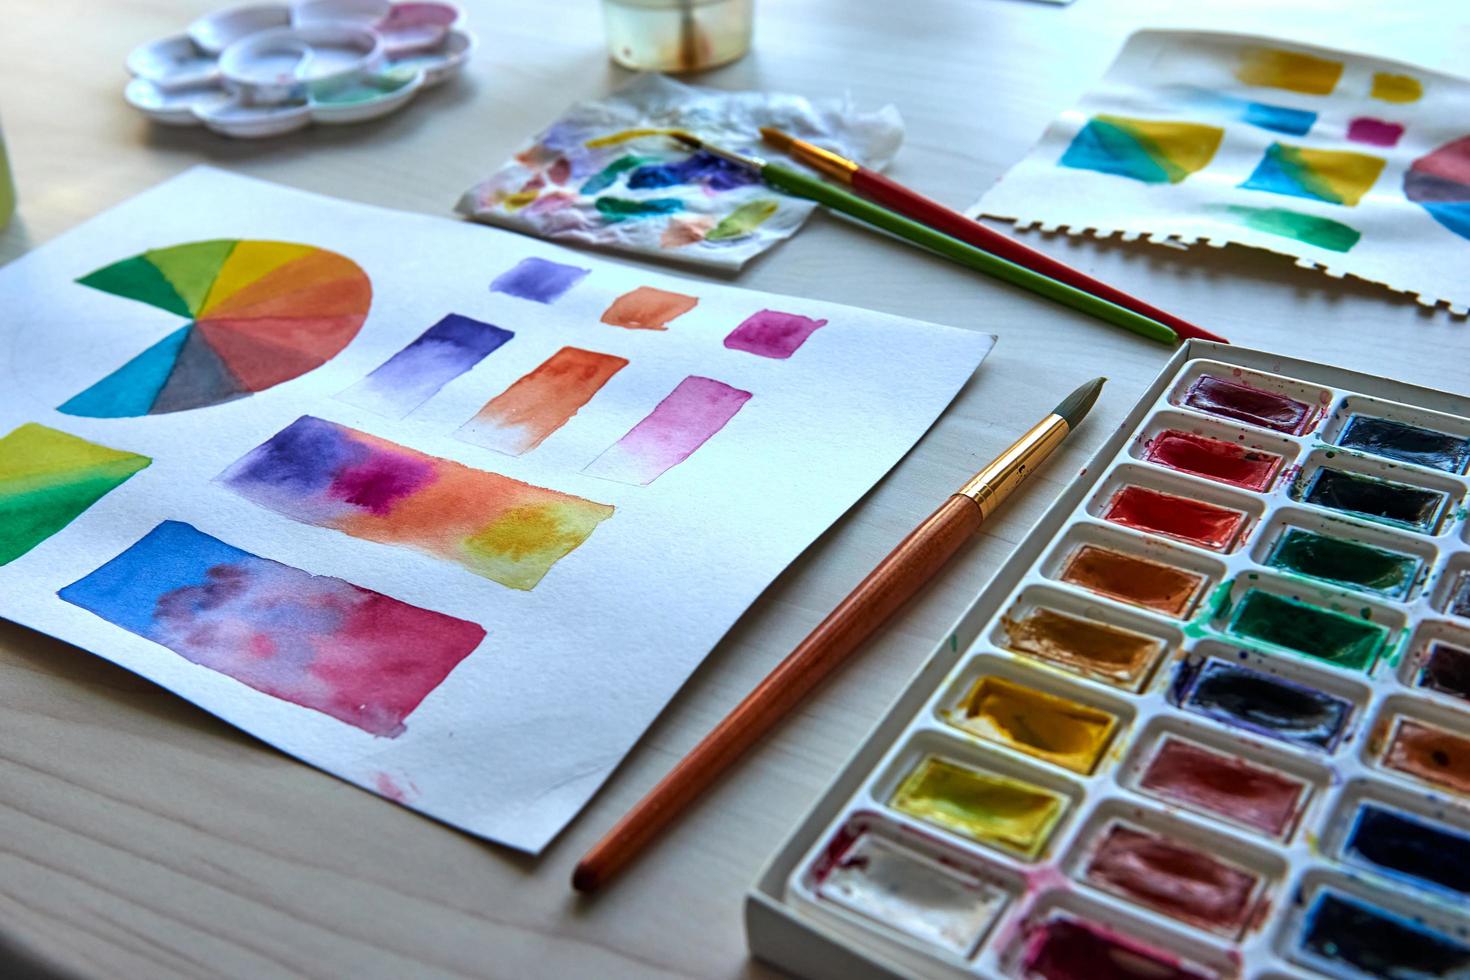 Artist's Workplace. Art Supplies Brushes, Paints, Watercolors. Art Studio. Drawing Lessons. Creative Workshop. Design Place. Watercolor Color Wheel And Palette. Color Theory Beginner Hobby Lessons 4639967 Stock Photo At Vecteezy